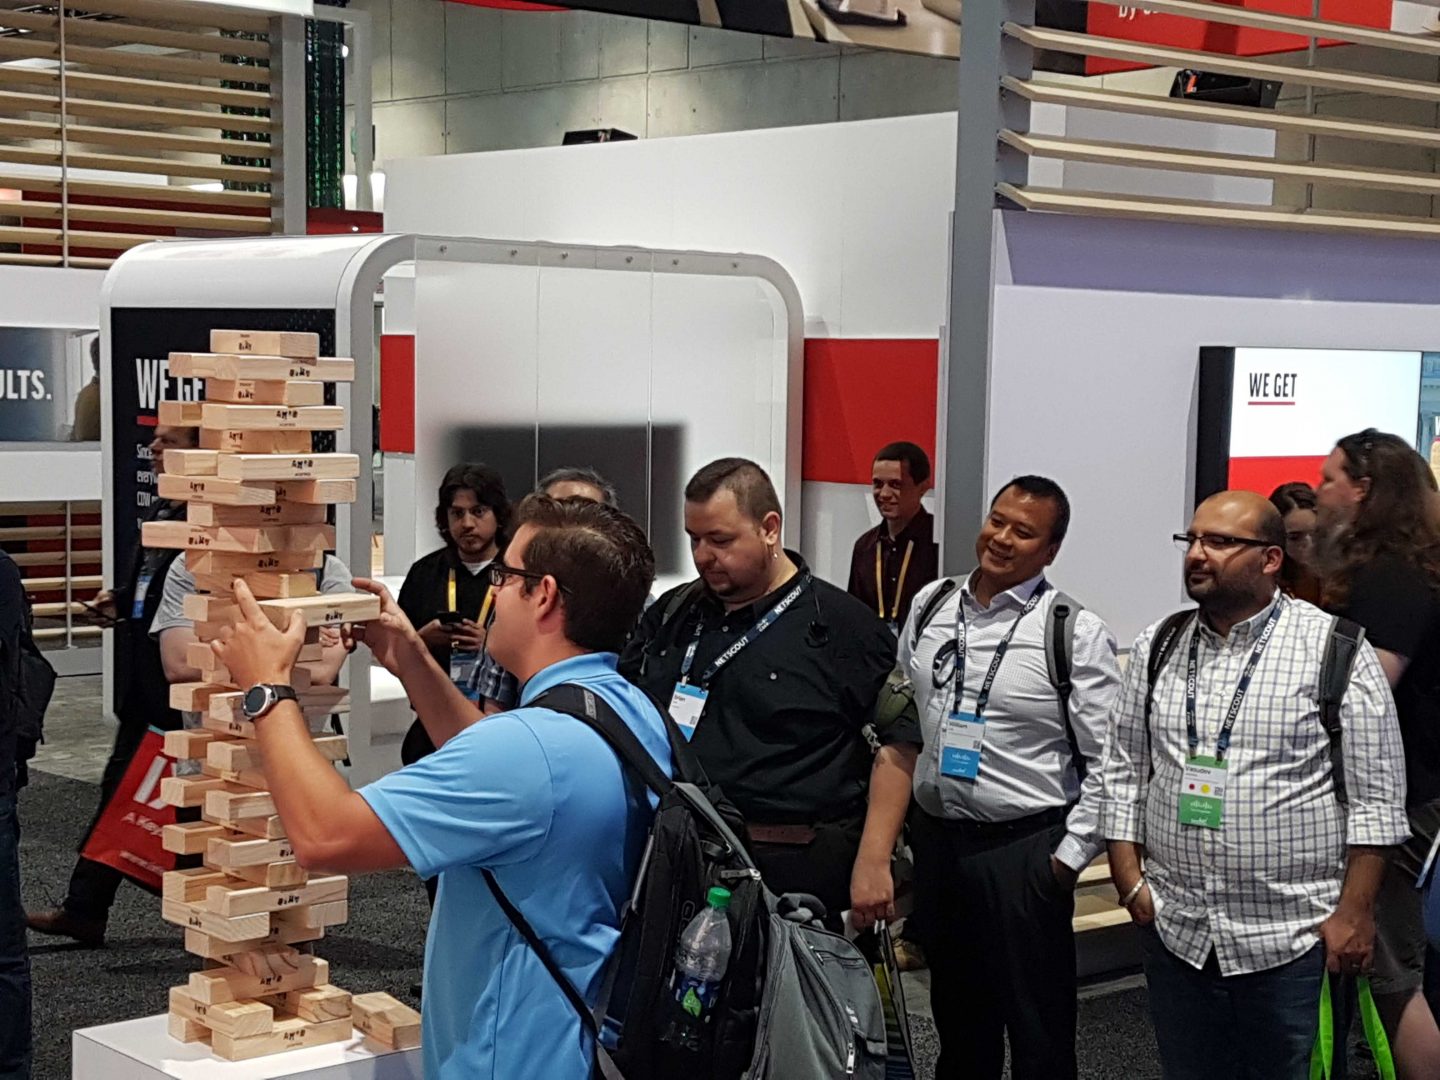 Cisco Live 2019 attendees try out a giant game of Jenga at BlueCat